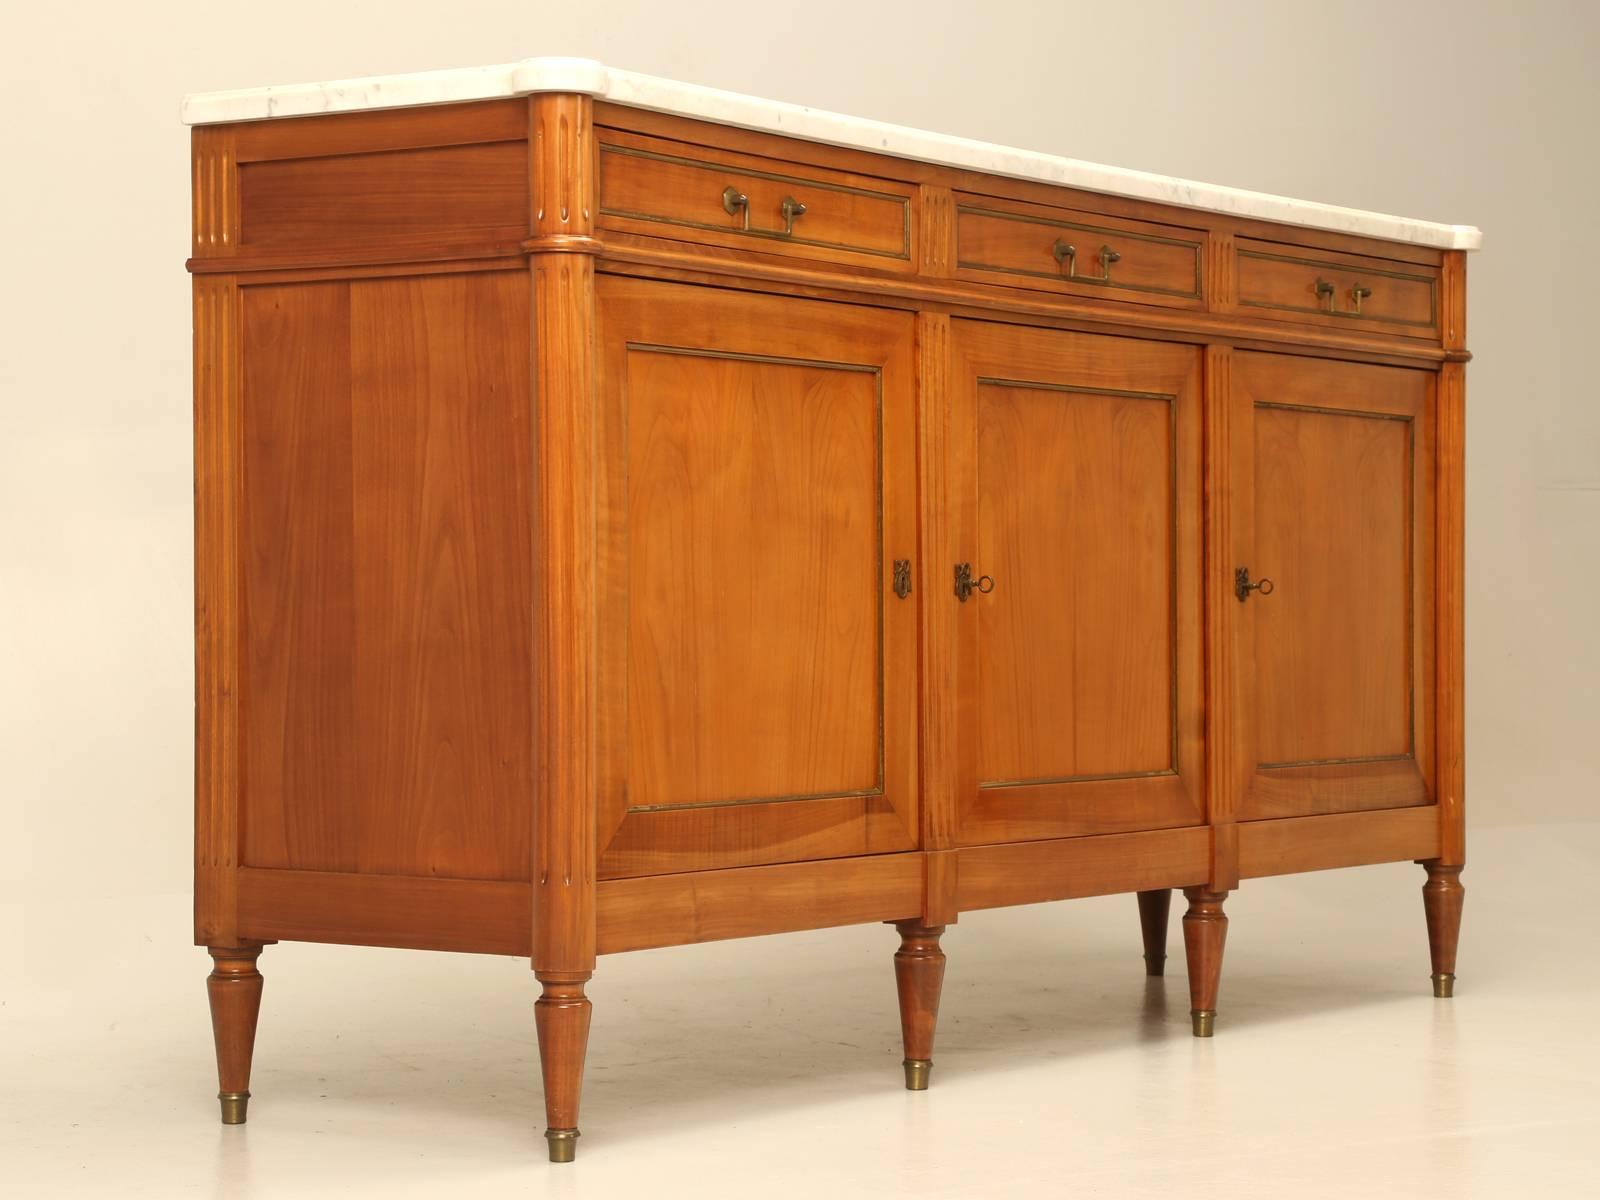 Classic Louis XVI style three-door buffet, made of French cherrywood and a little nicer quality than most. The drawers are dove-tailed front and back and they drawer bottoms are a hardwood and not that flimsy plywood that was commonly used. The